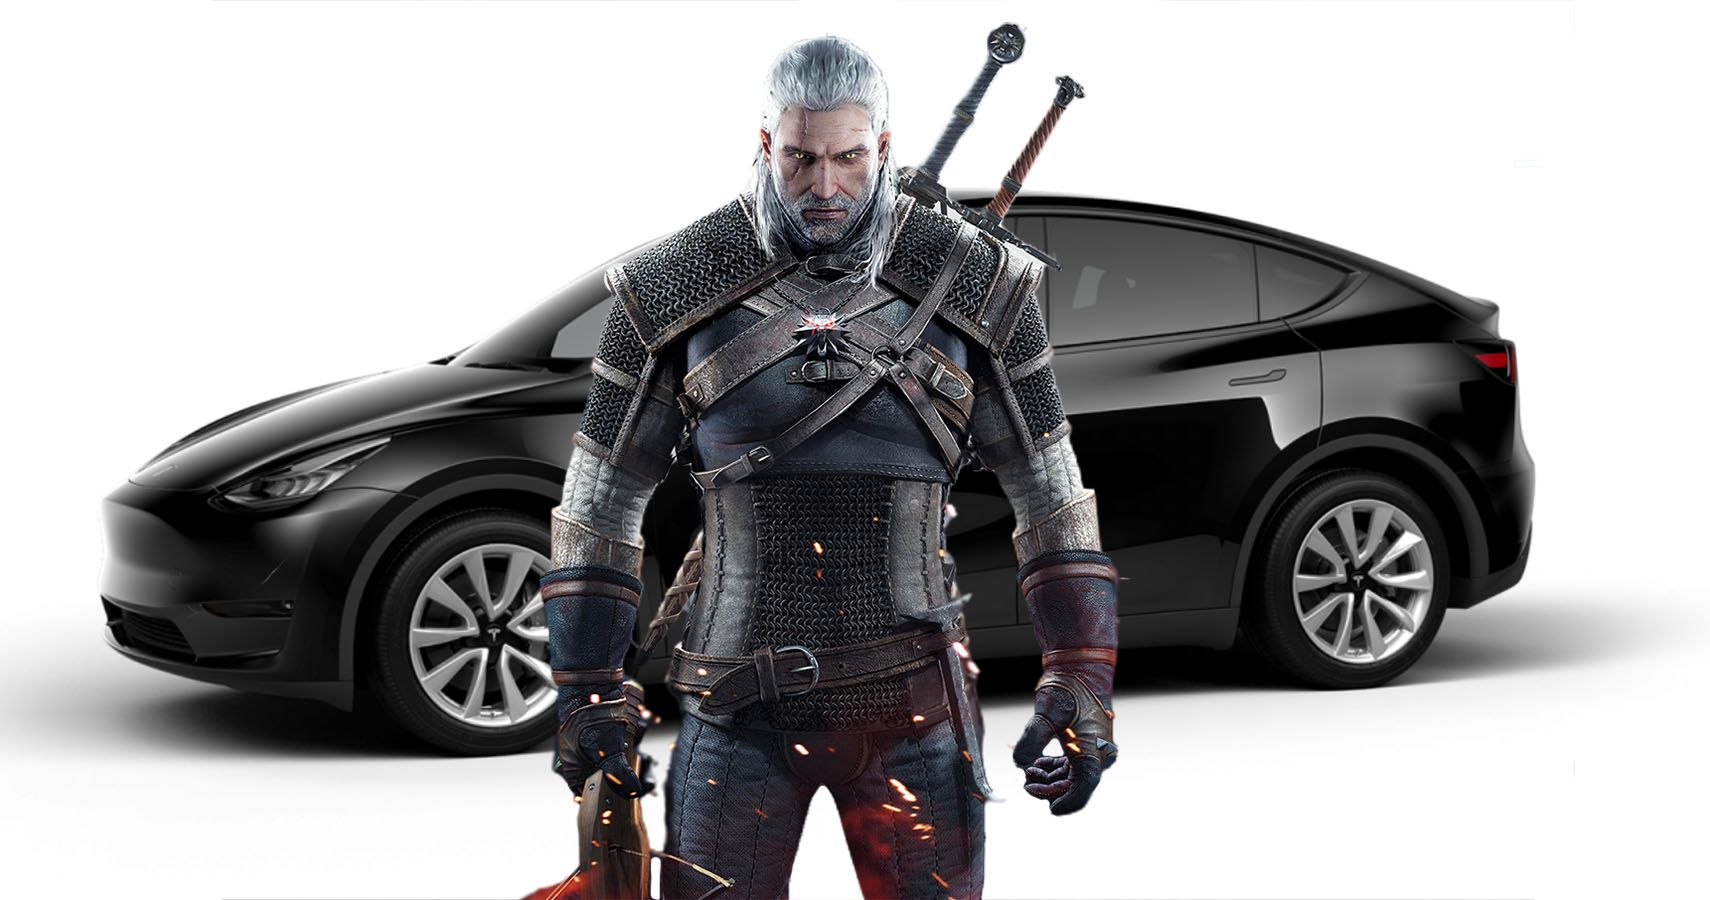 An image of the Tesla Model Y and Geralt from The Witcher game.